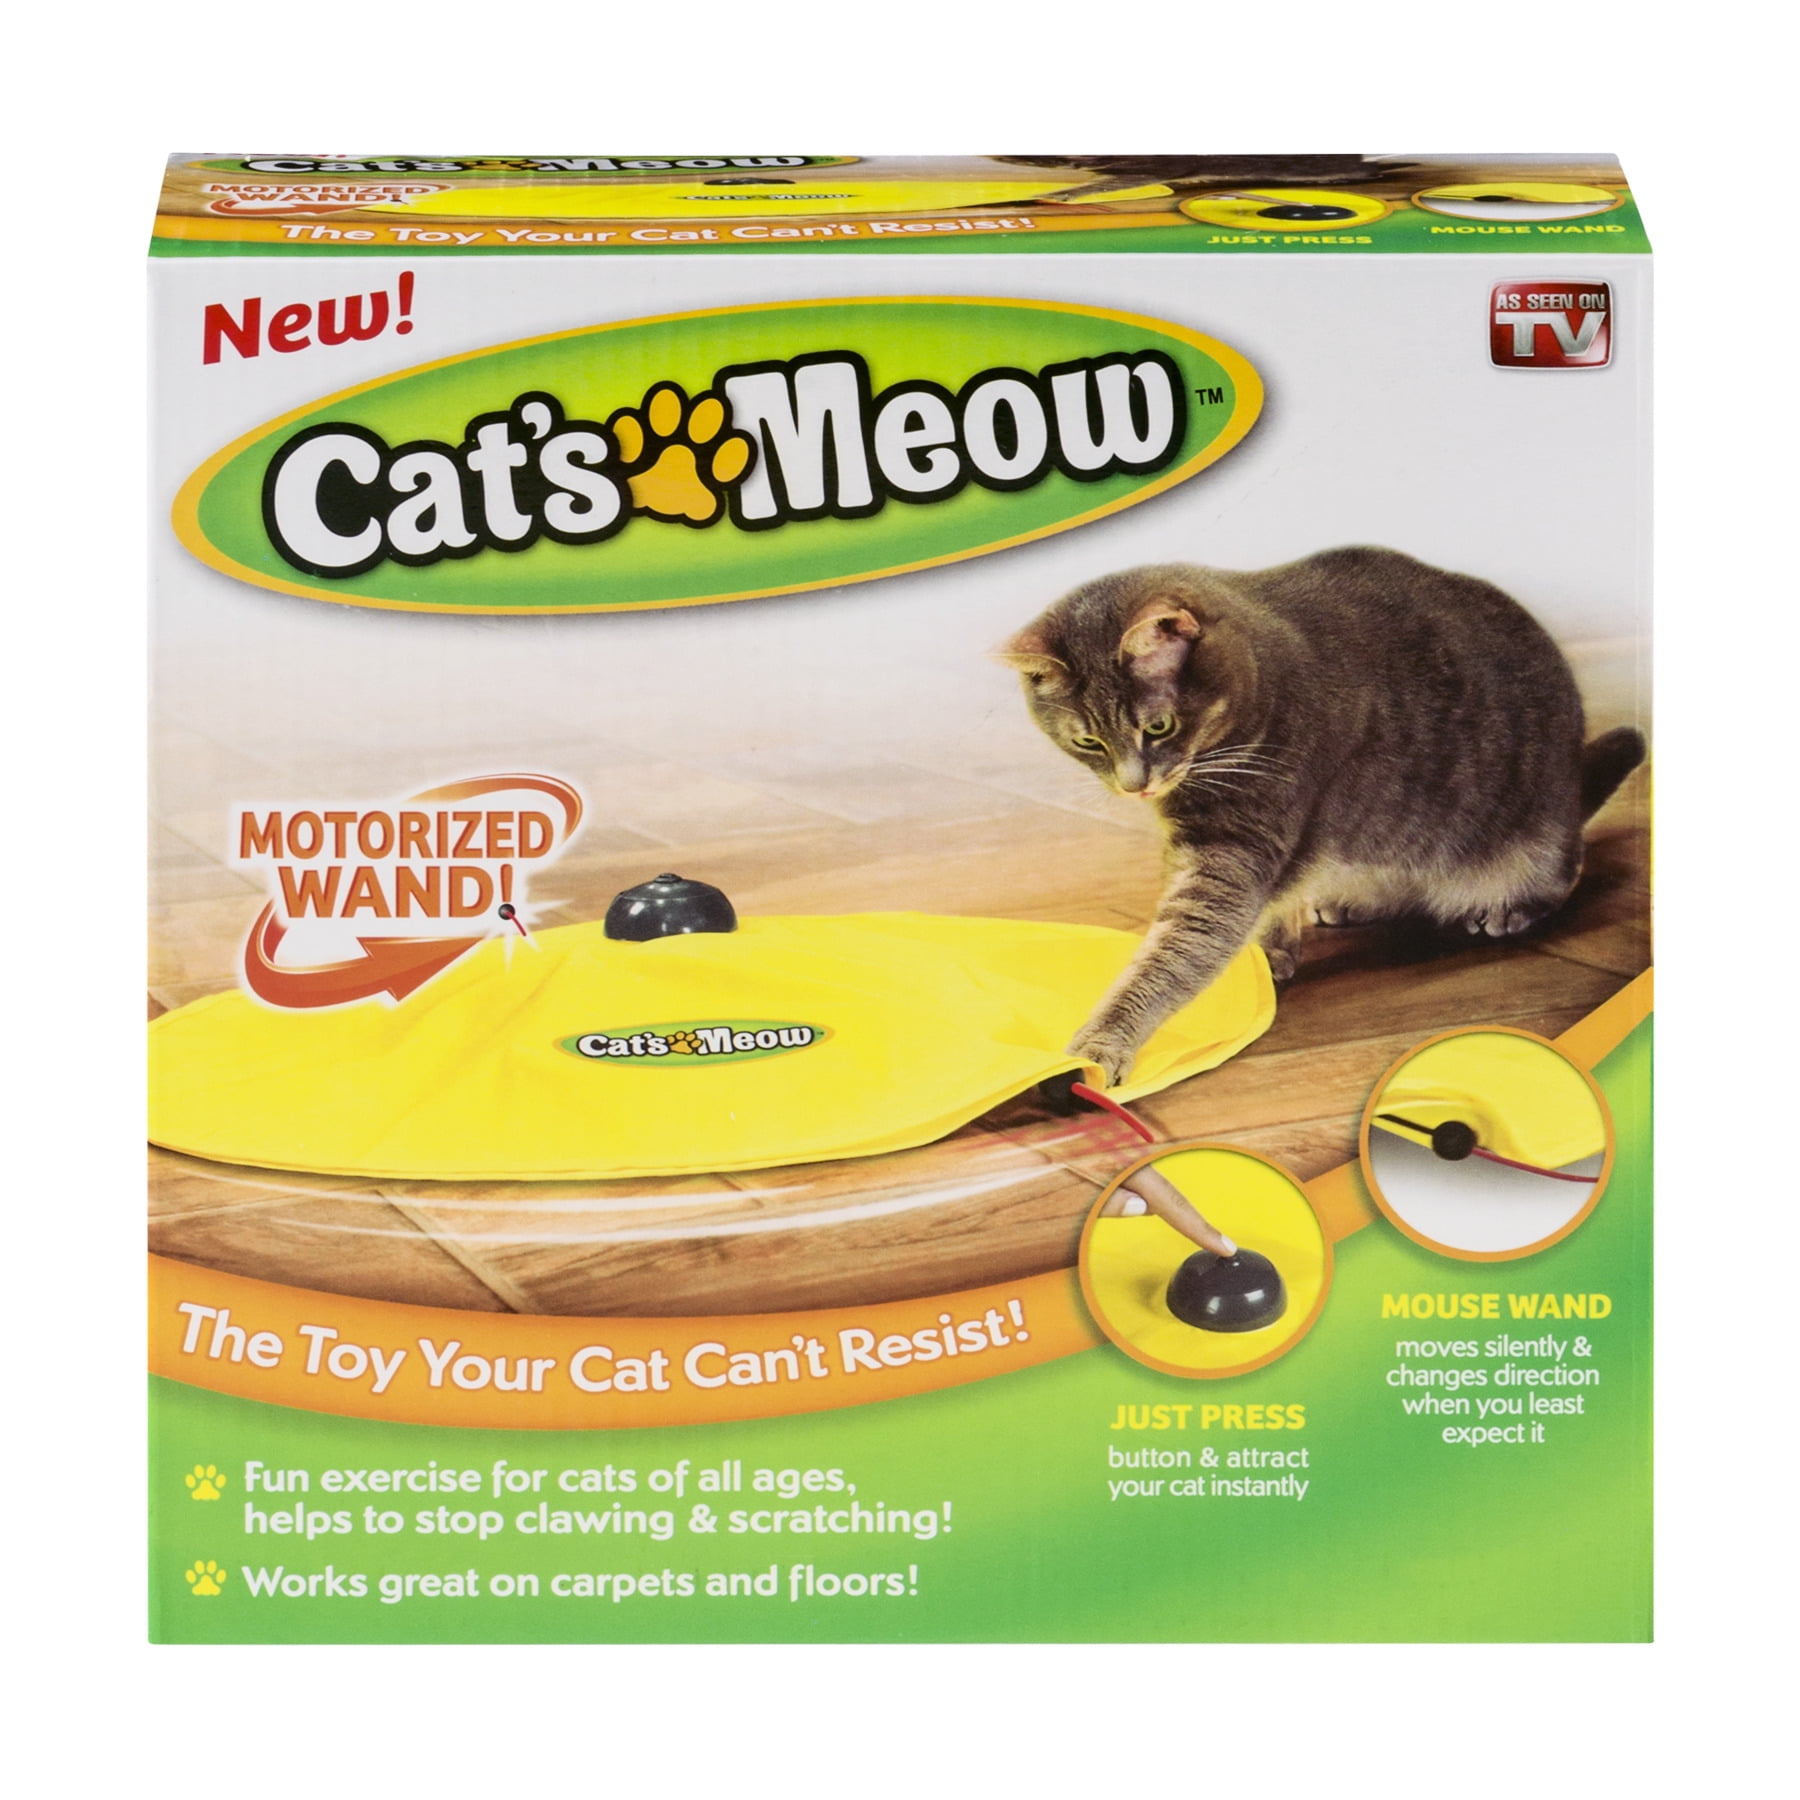 the cat's meow toy